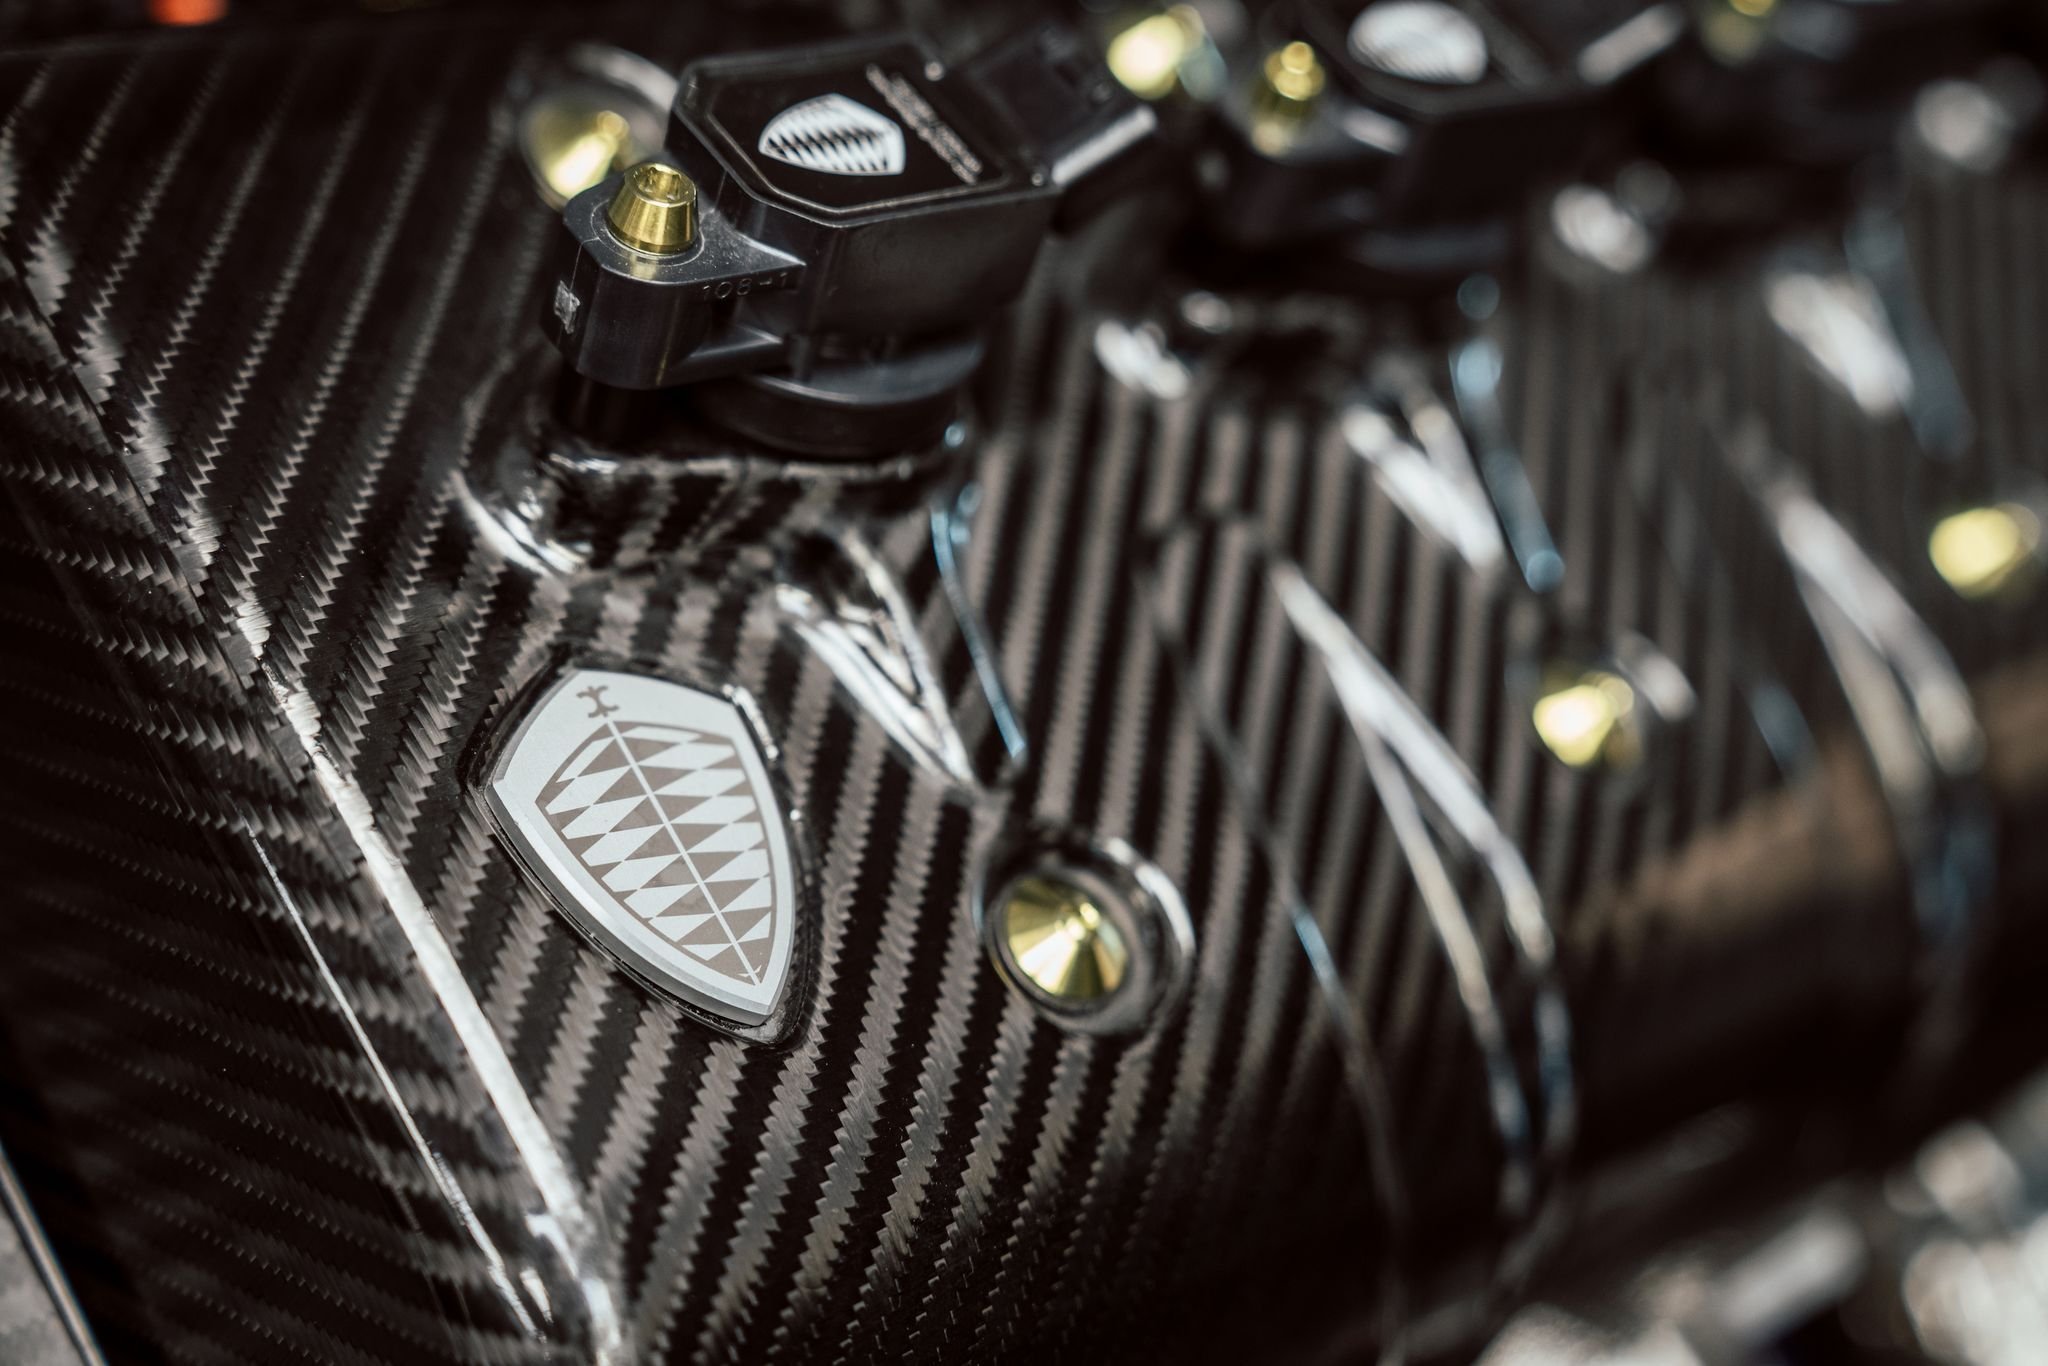 How Koenigsegg Built the Fastest-Revving Engine in Production Car History